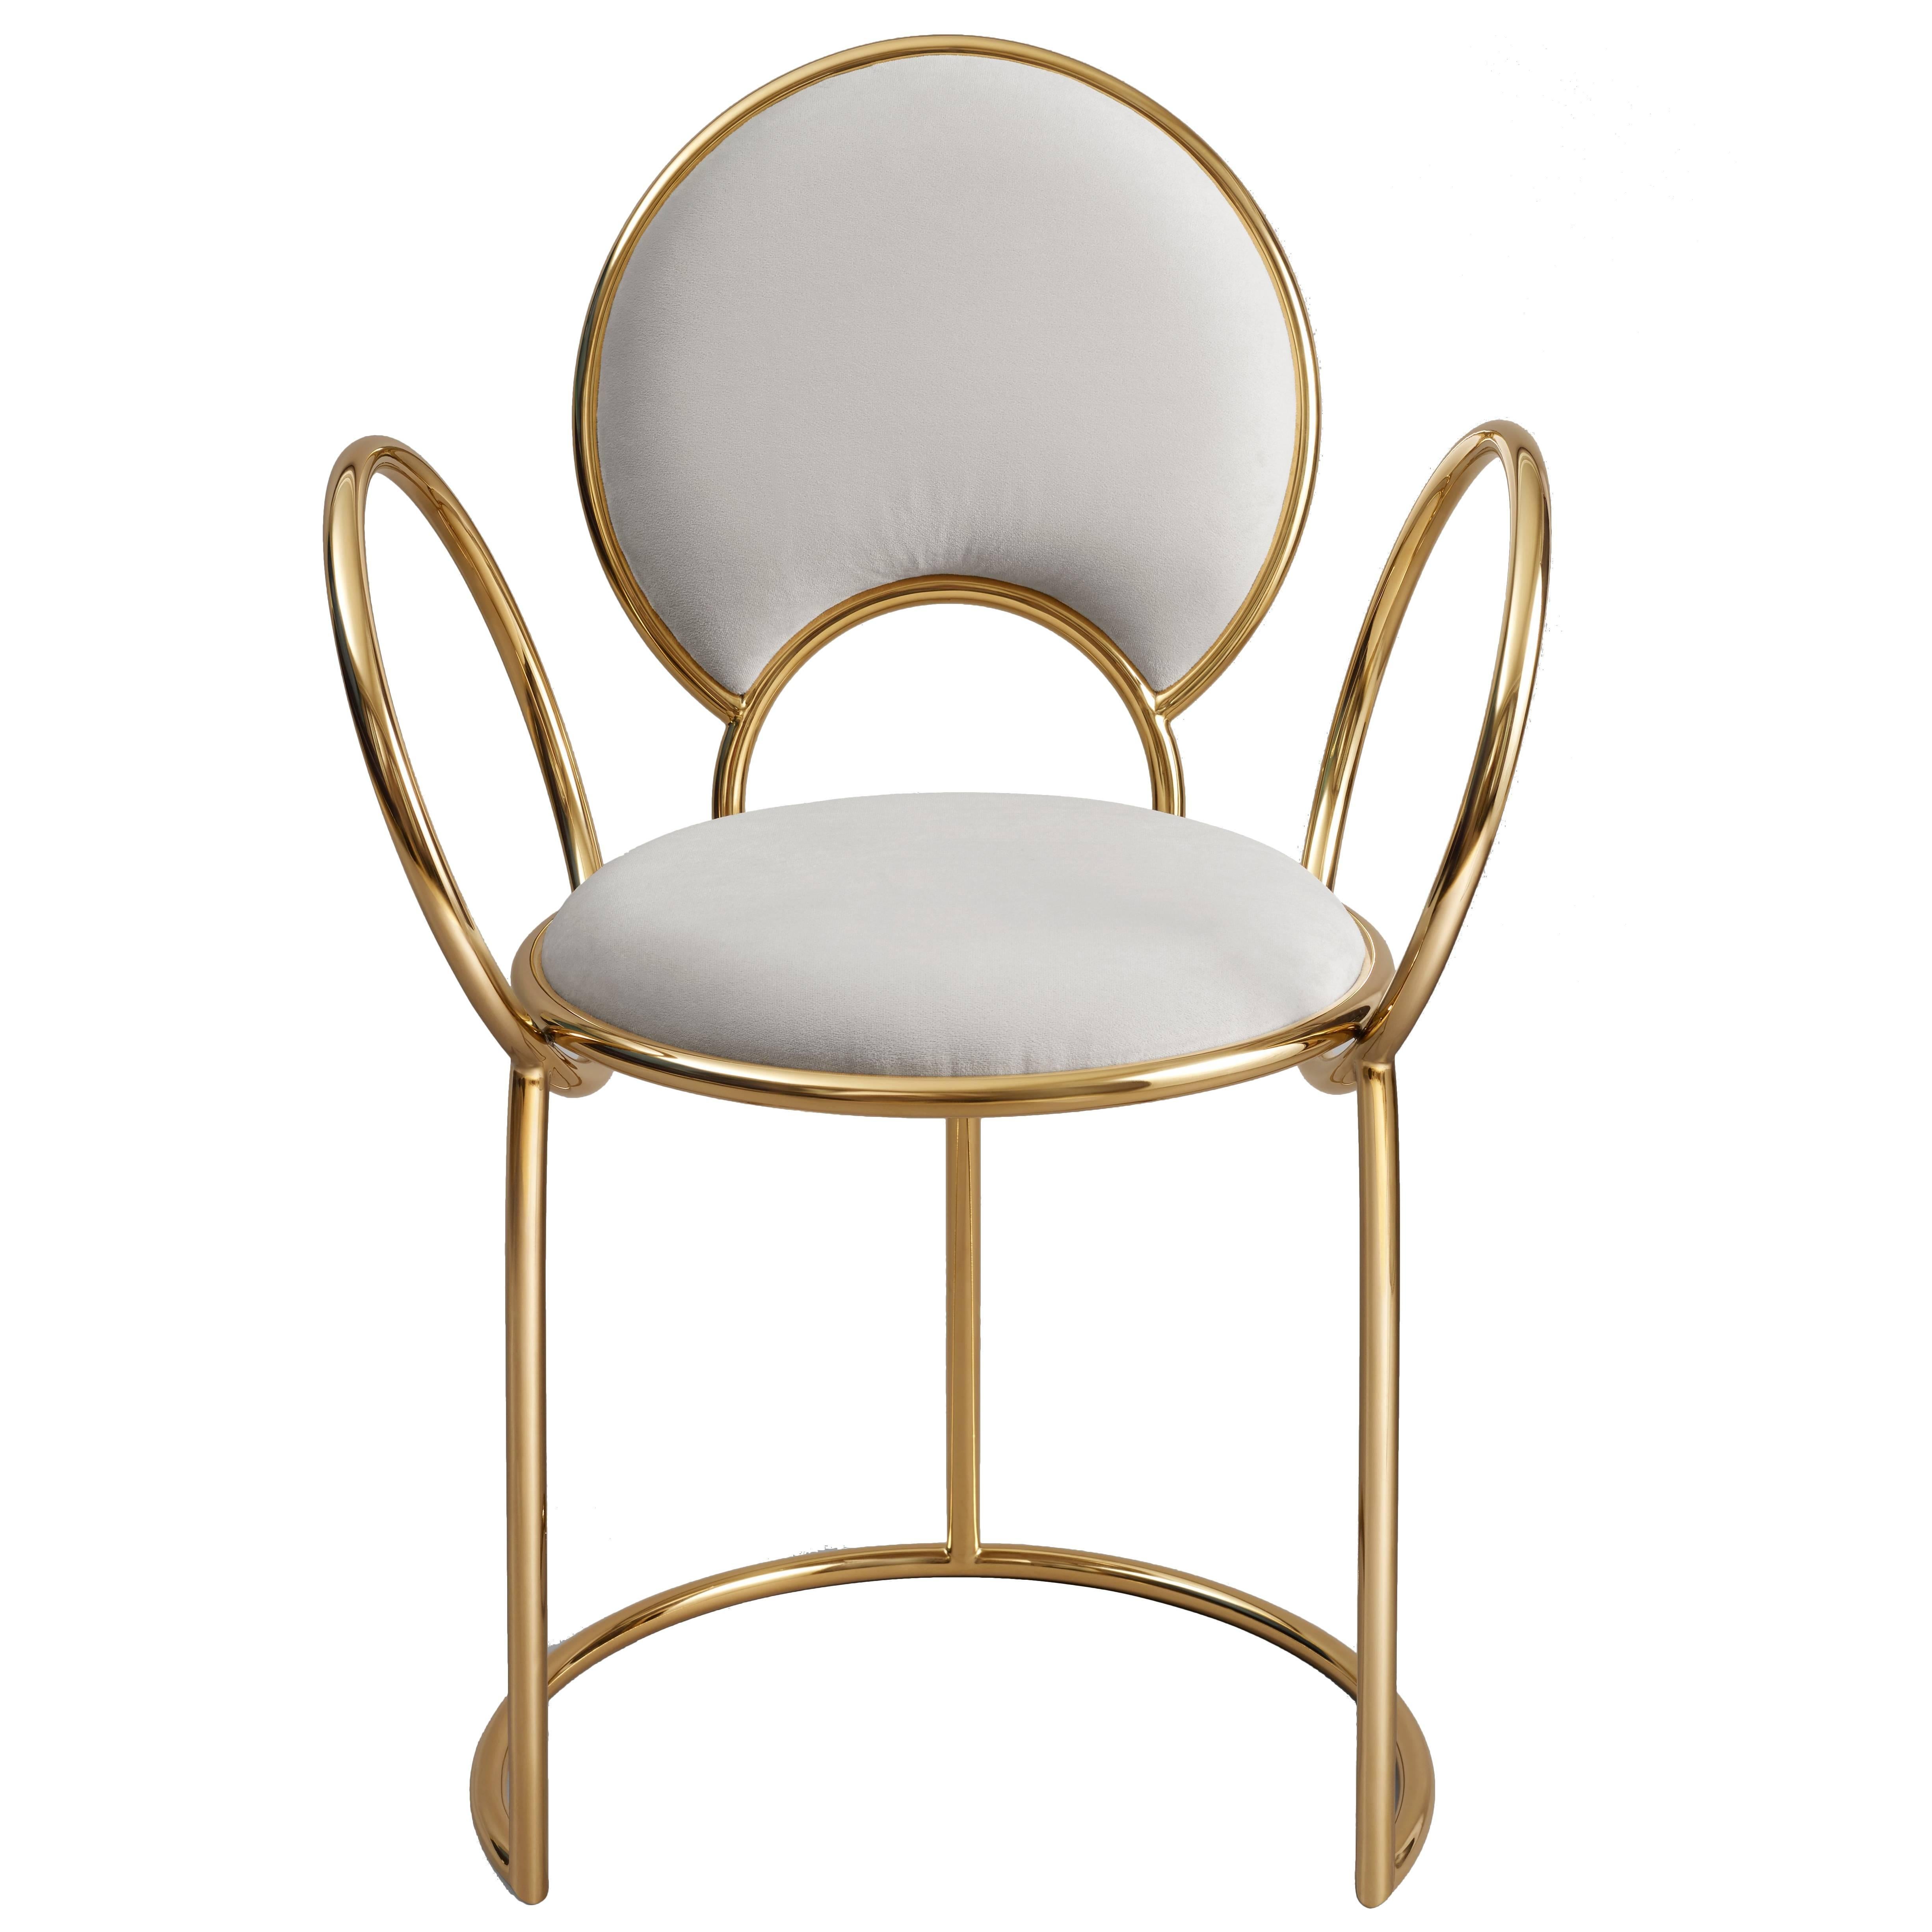 The 'Yue chair' by much acclaimed duo Studio MVW is produced in anodized stainless steel with brass finish in a subtile gold pink shade. The delicate loop armrests completing the rounded light grey velvet covered seat and back make the chair a true